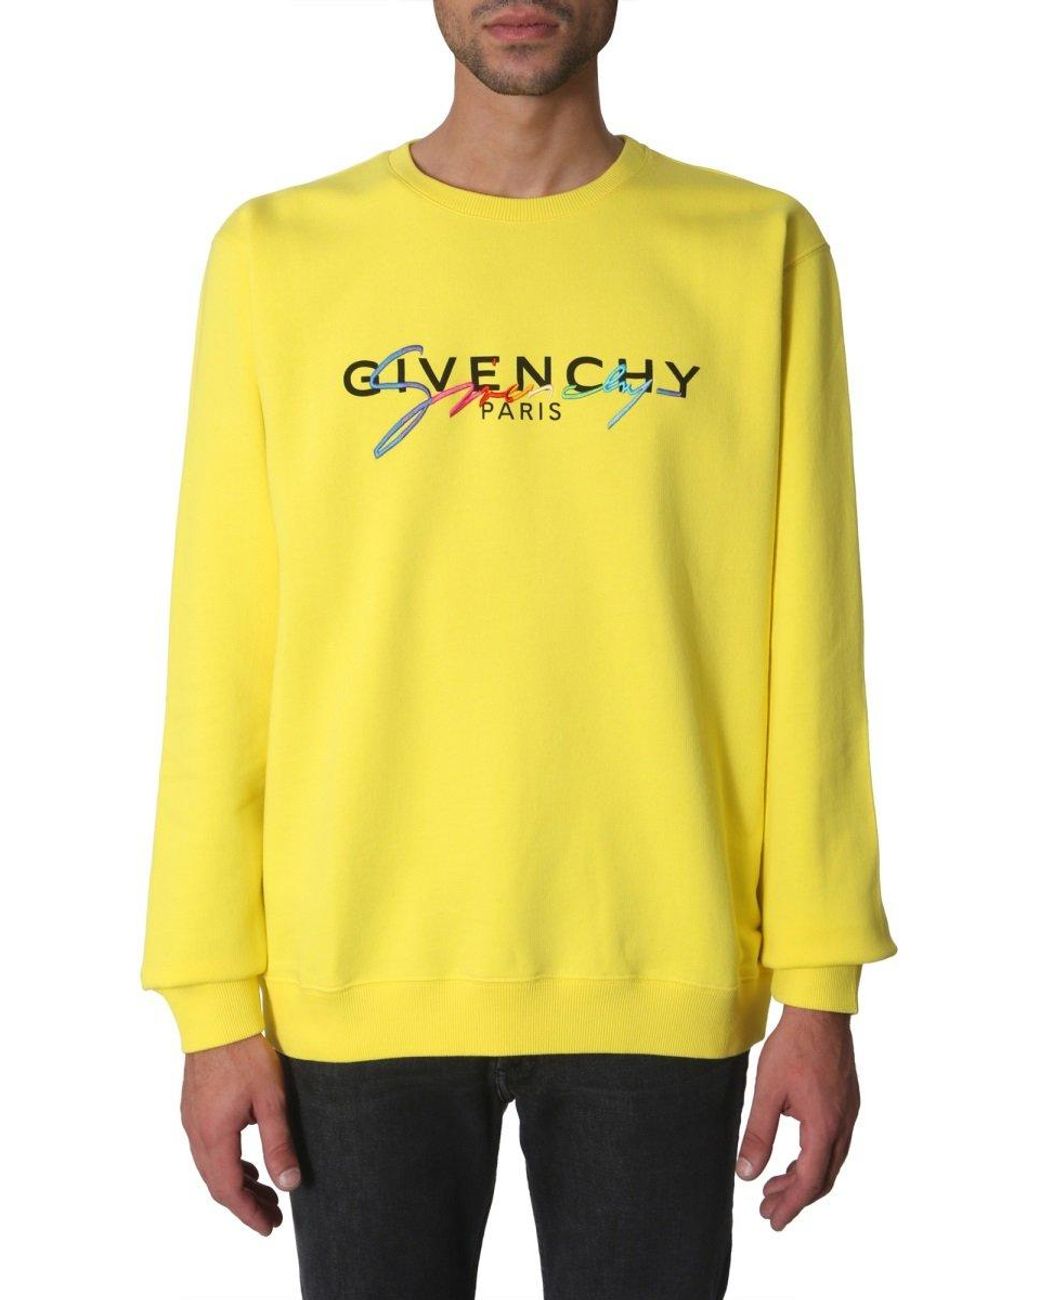 Givenchy Yellow Cotton Sweatshirt in Yellow for Men - Save 46% - Lyst